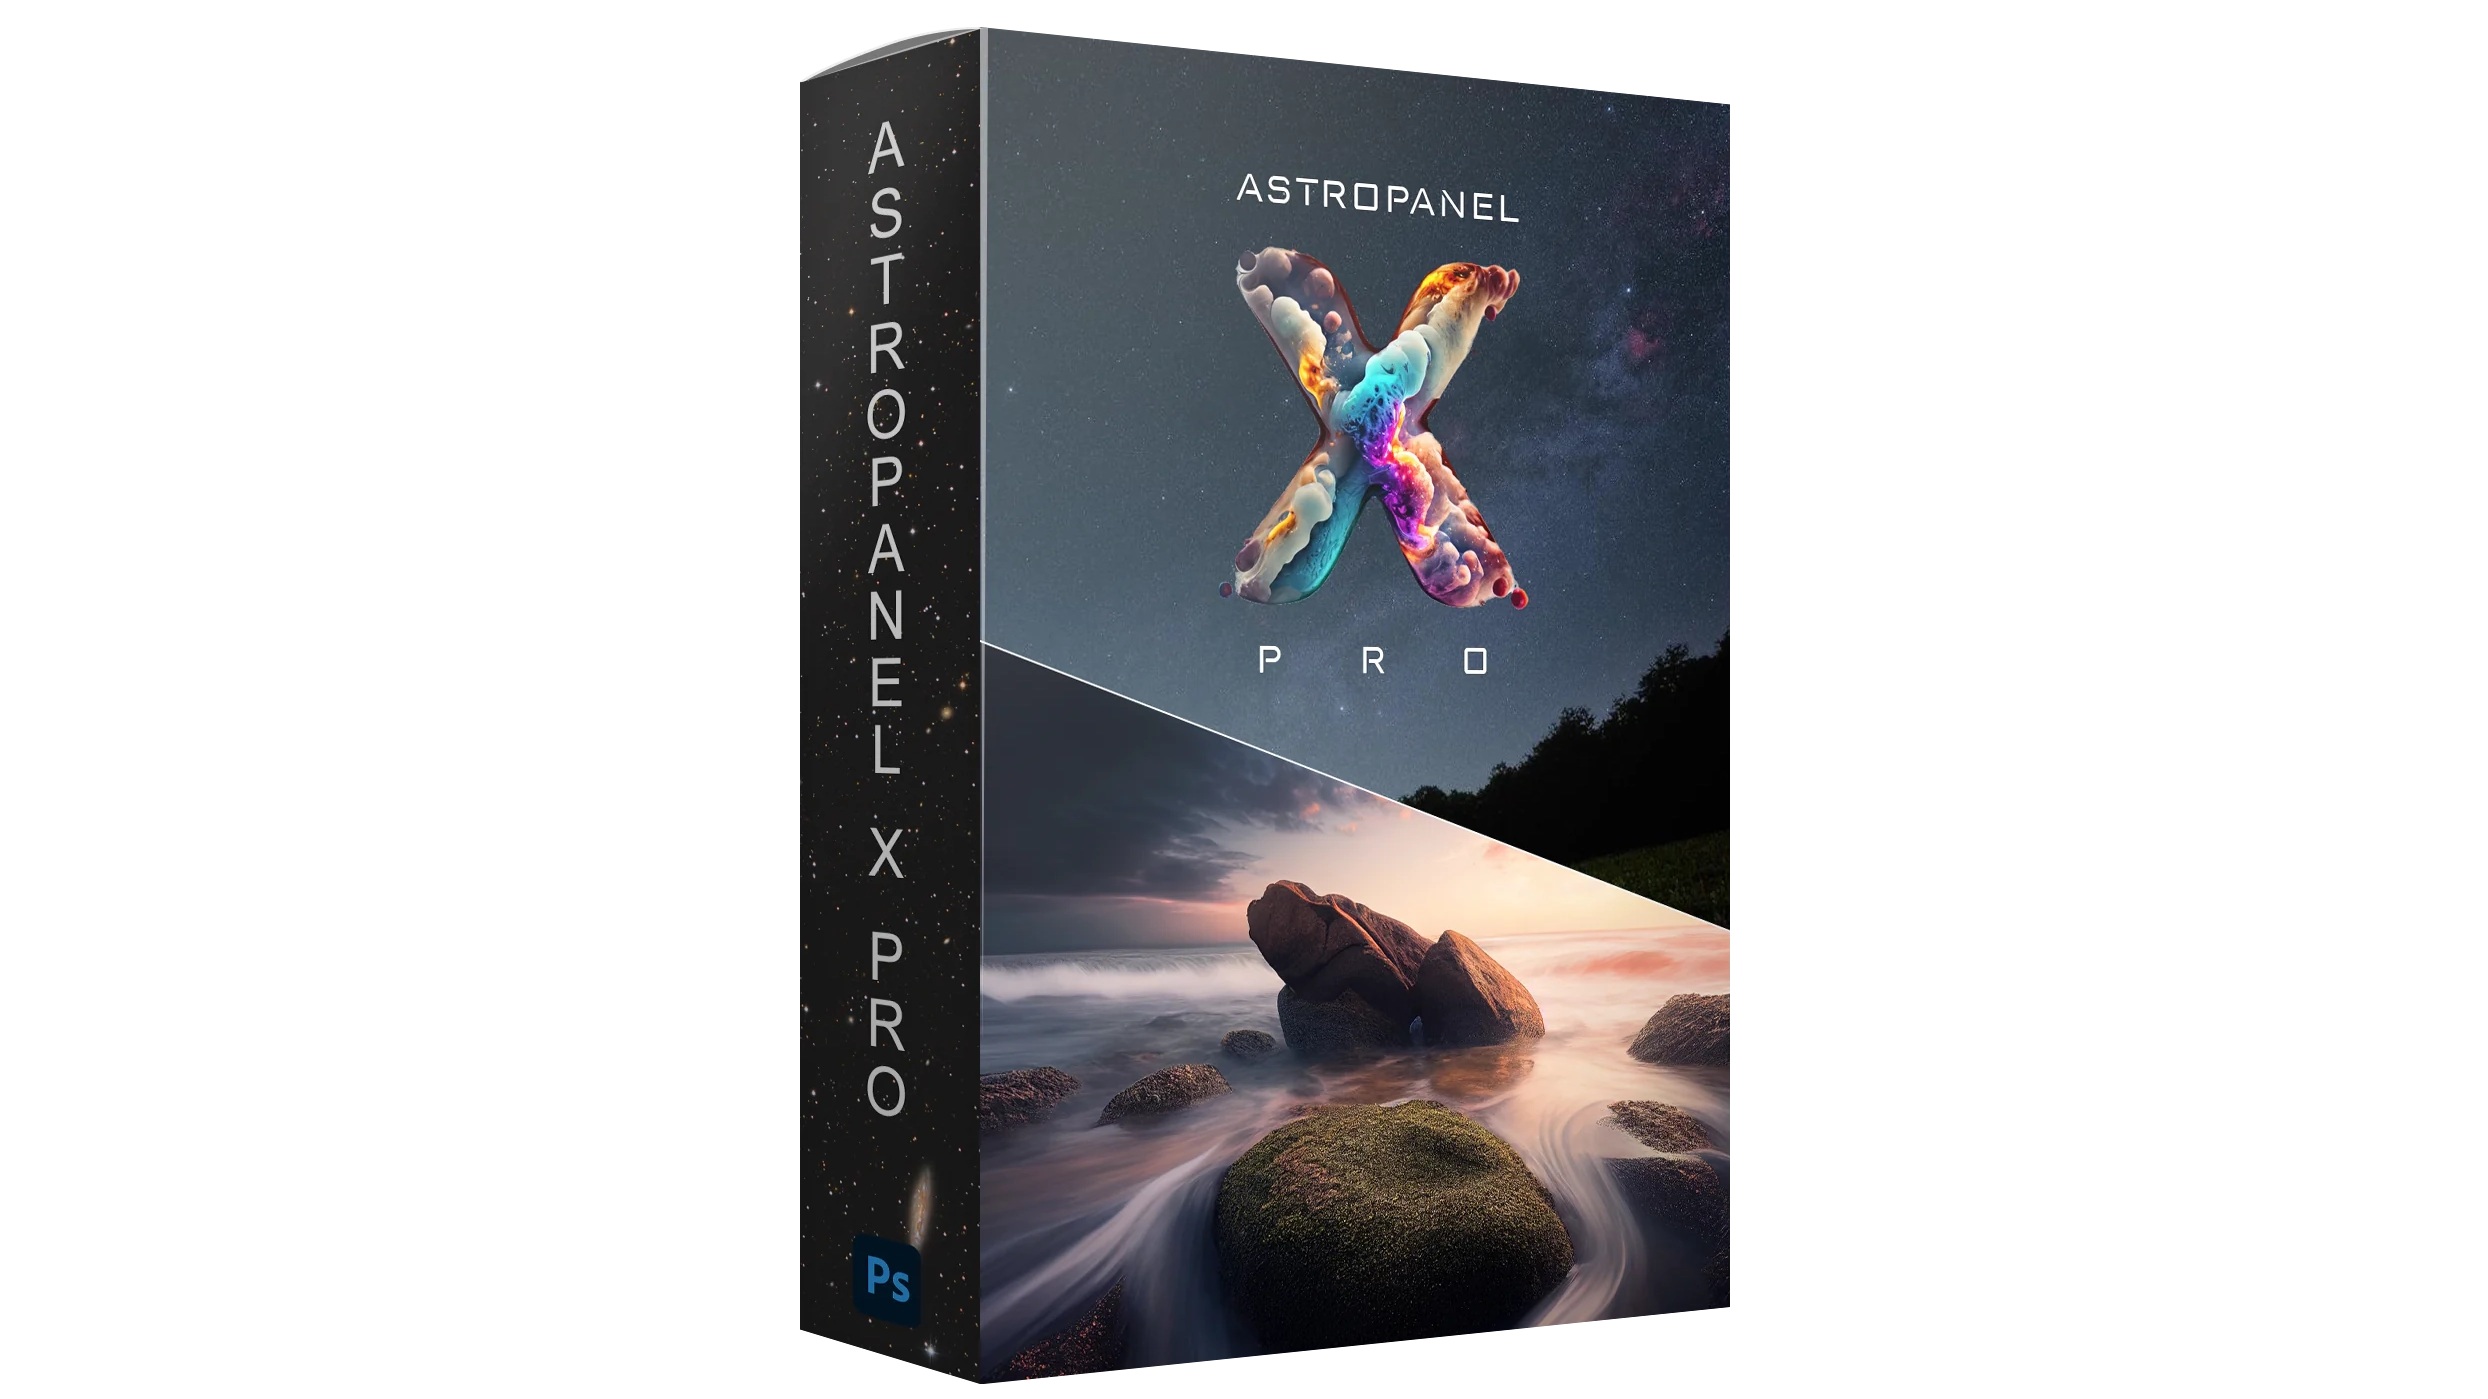 Load video: The most powerful plug-in for Adobe Photoshop